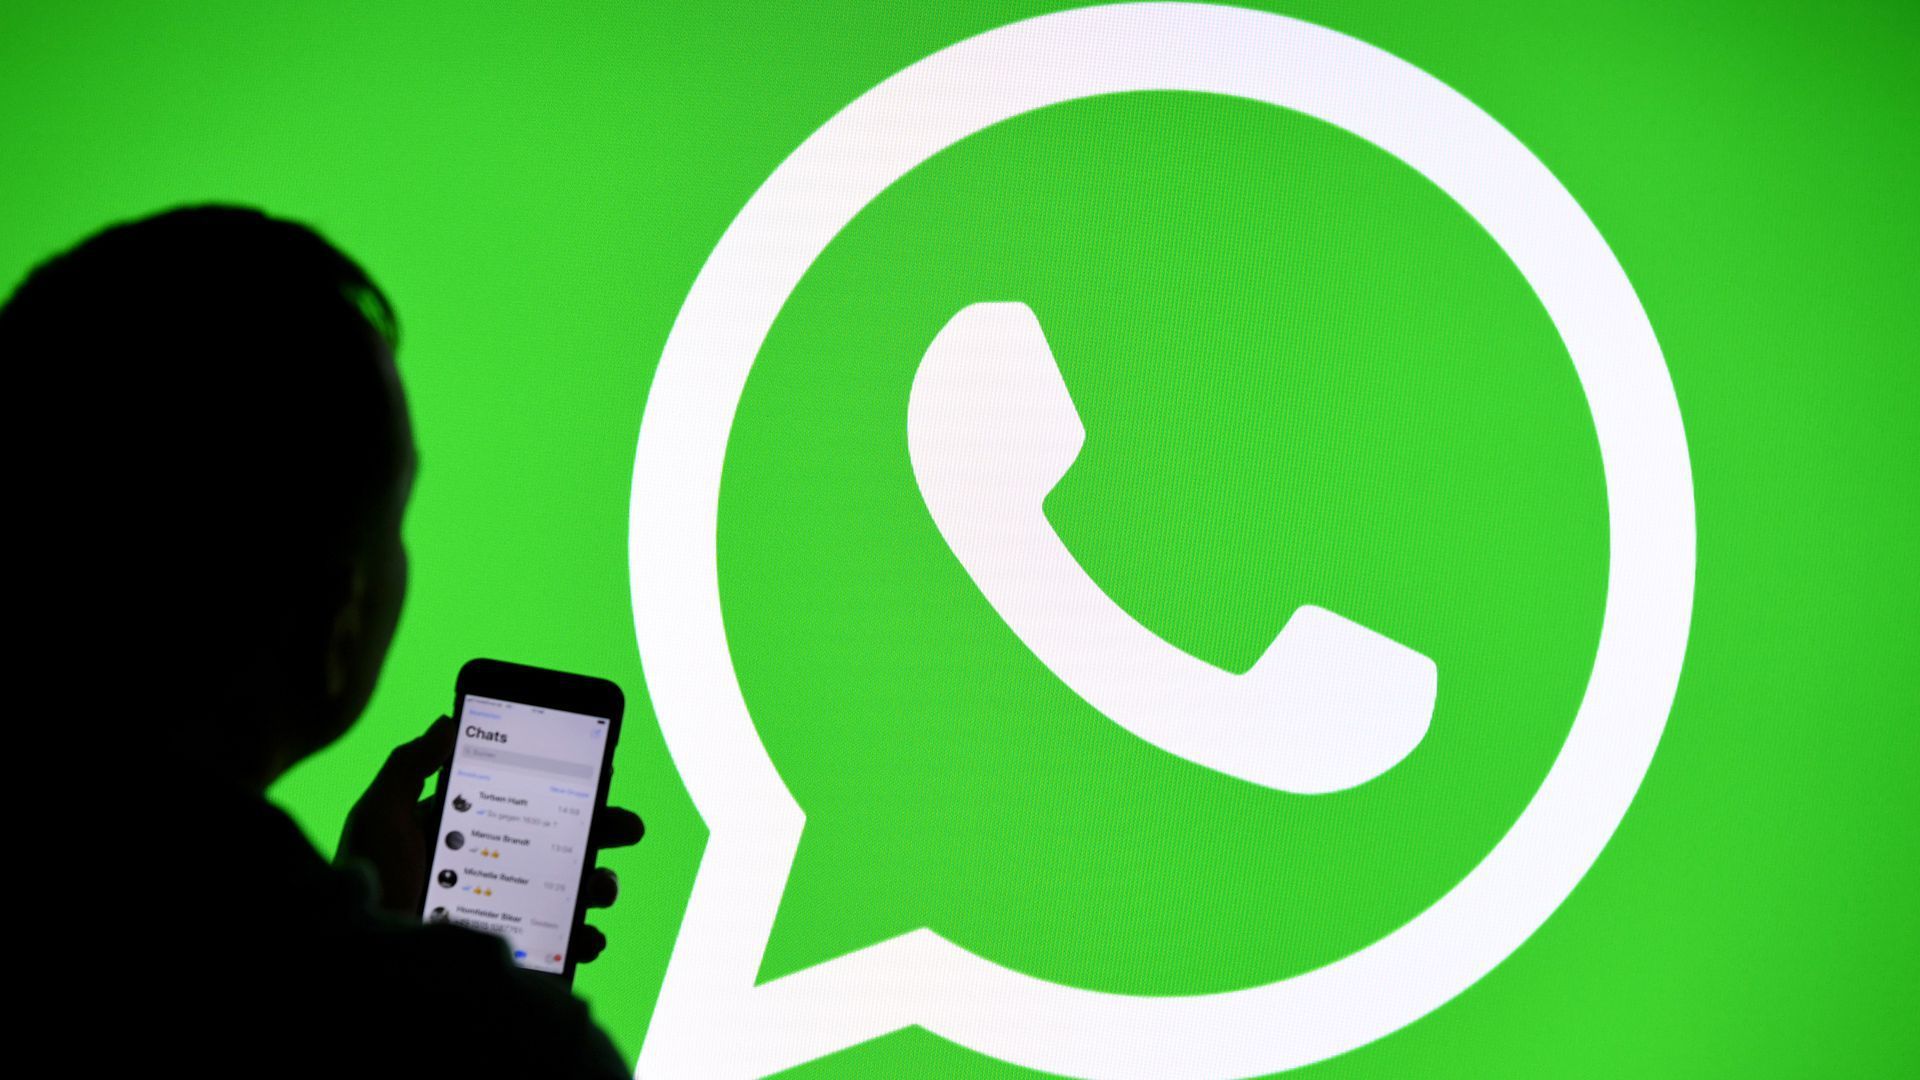 A photo illustration of the silhouette of a person holding a smartphone against a green WhatsApp logo as backdrop